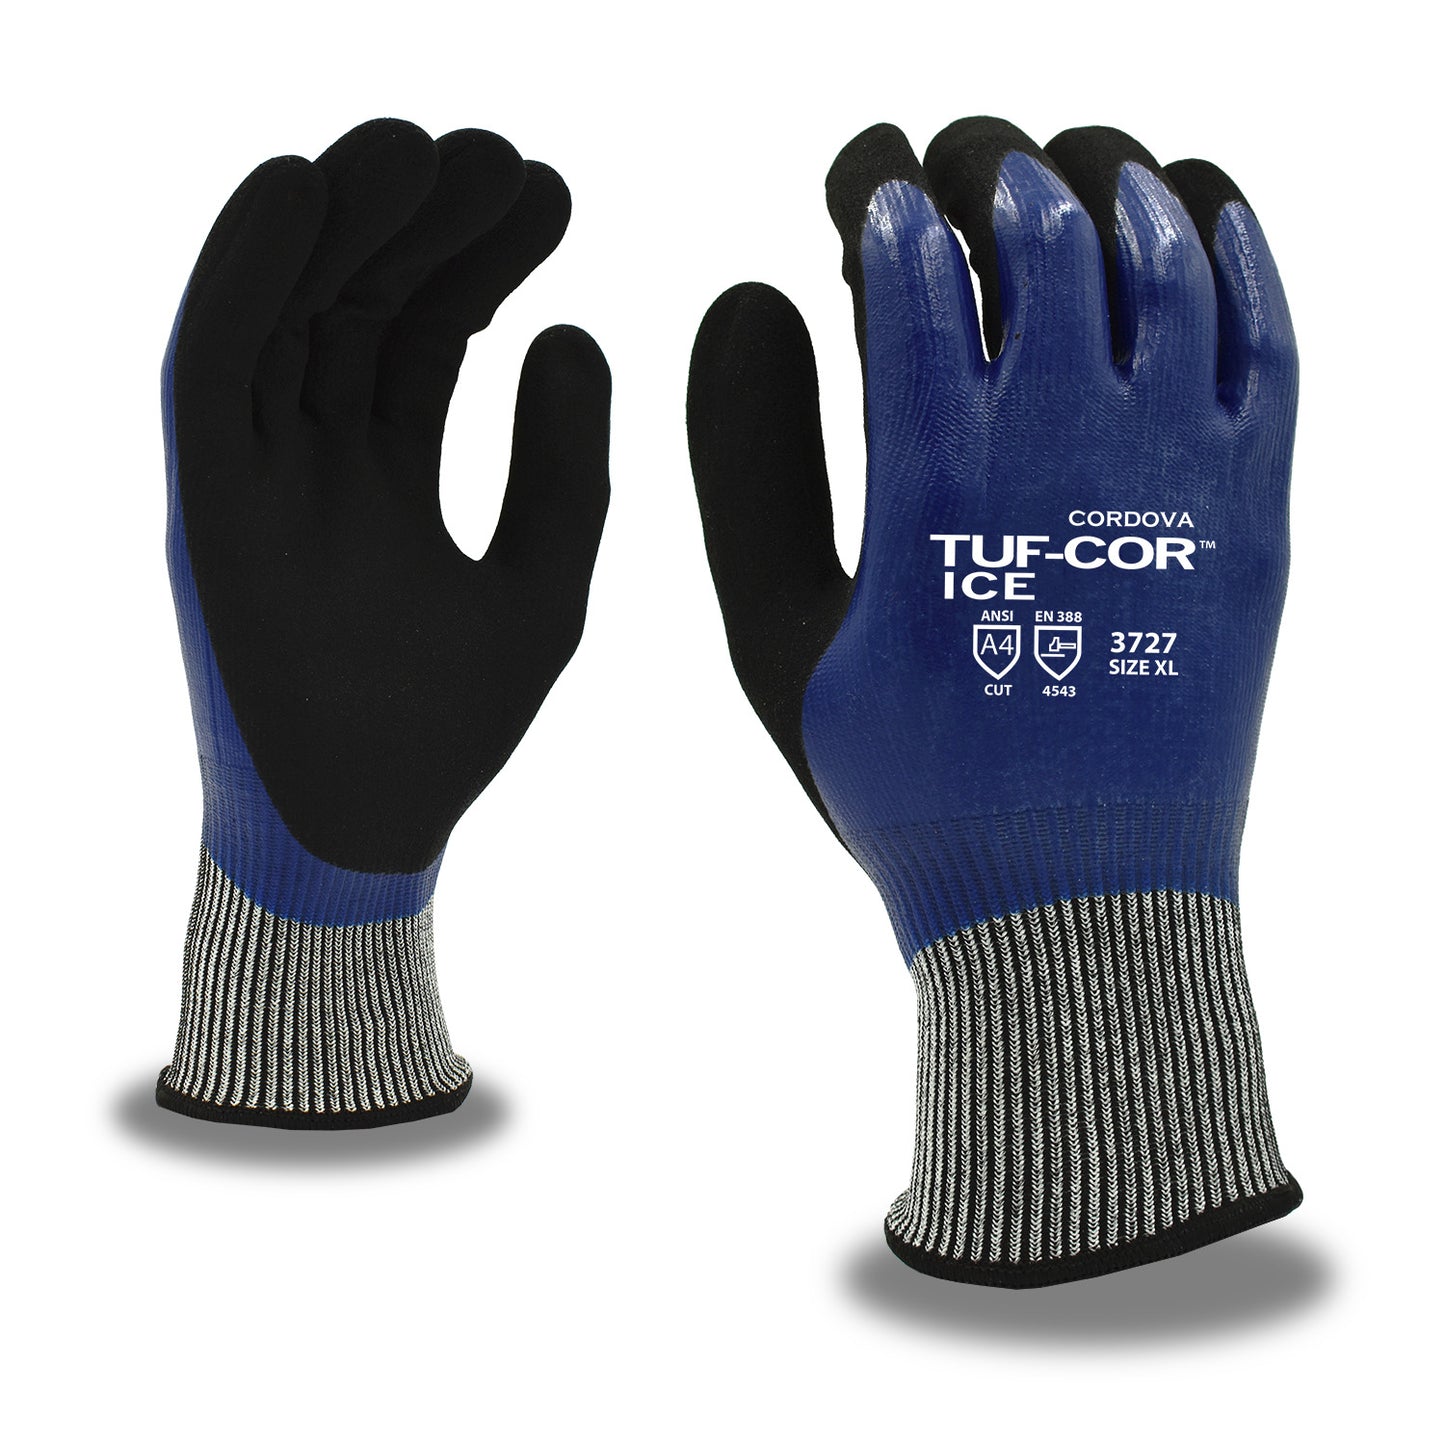 Tuf-Cor Cut-Resistant Ice Gloves, ANSI Cut Level A4